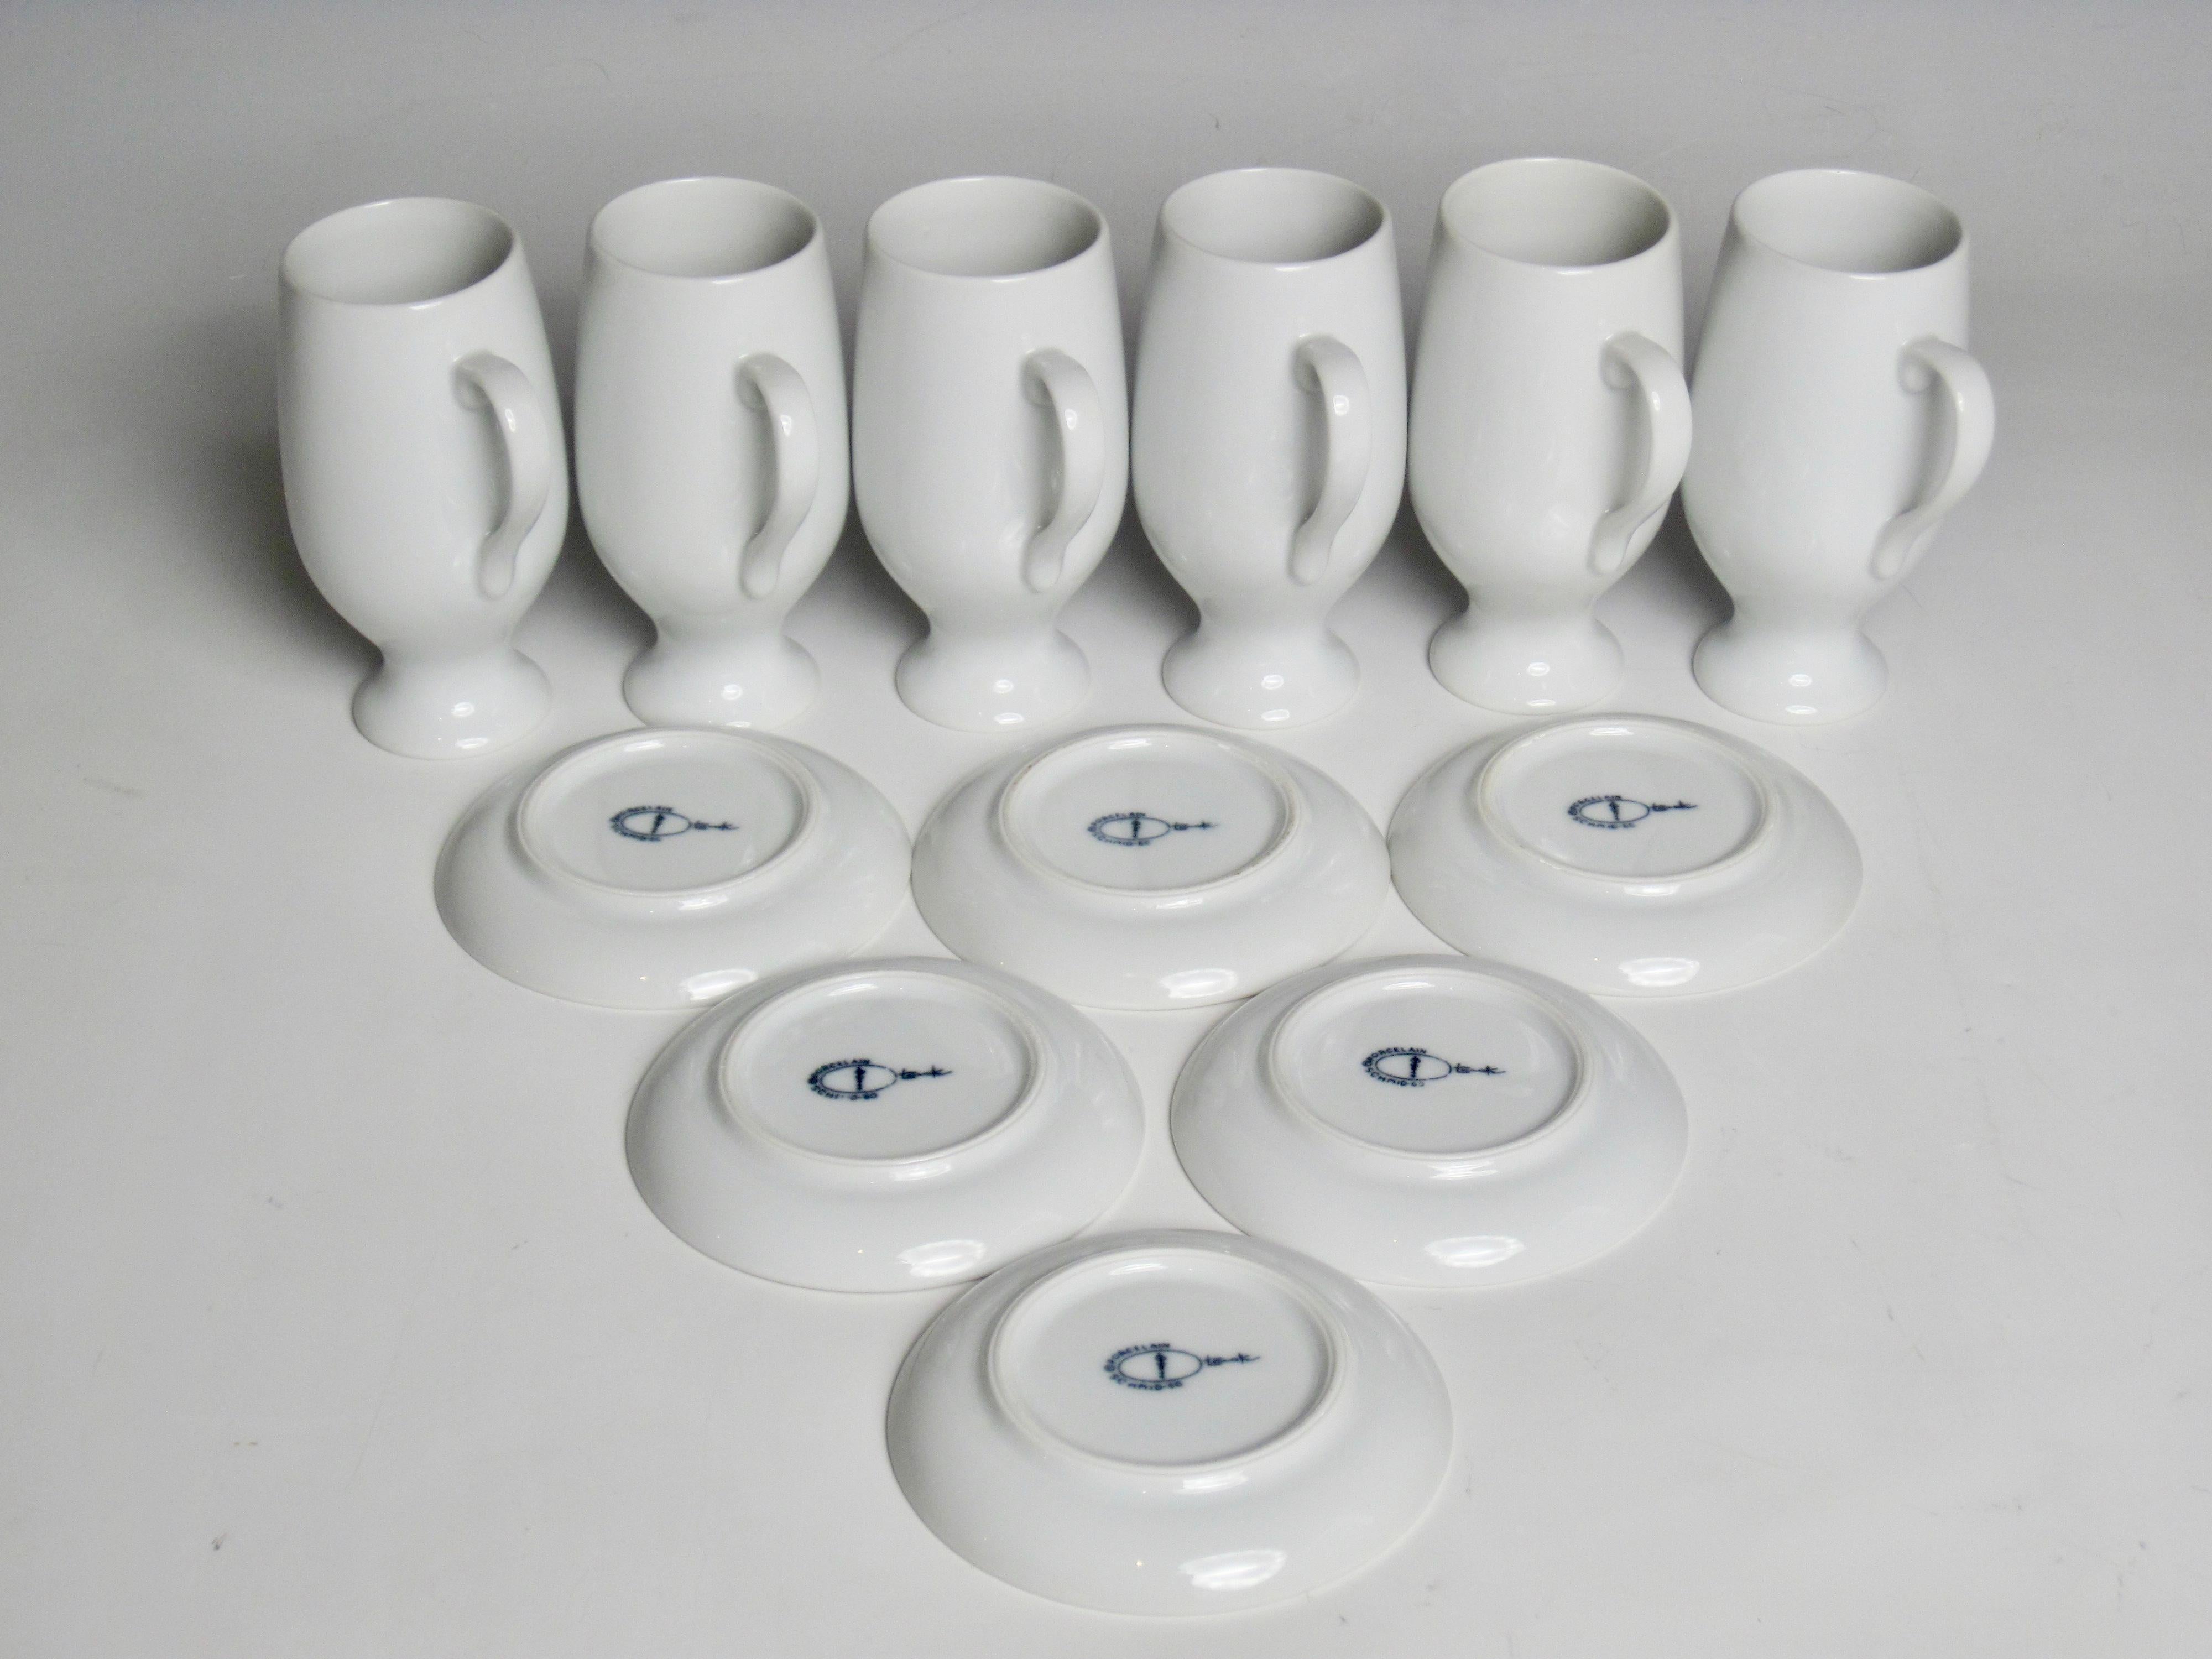 Porcelain Set of Six Espresso Cups and Saucers Designed by Lagardo Tackett for Schmid For Sale